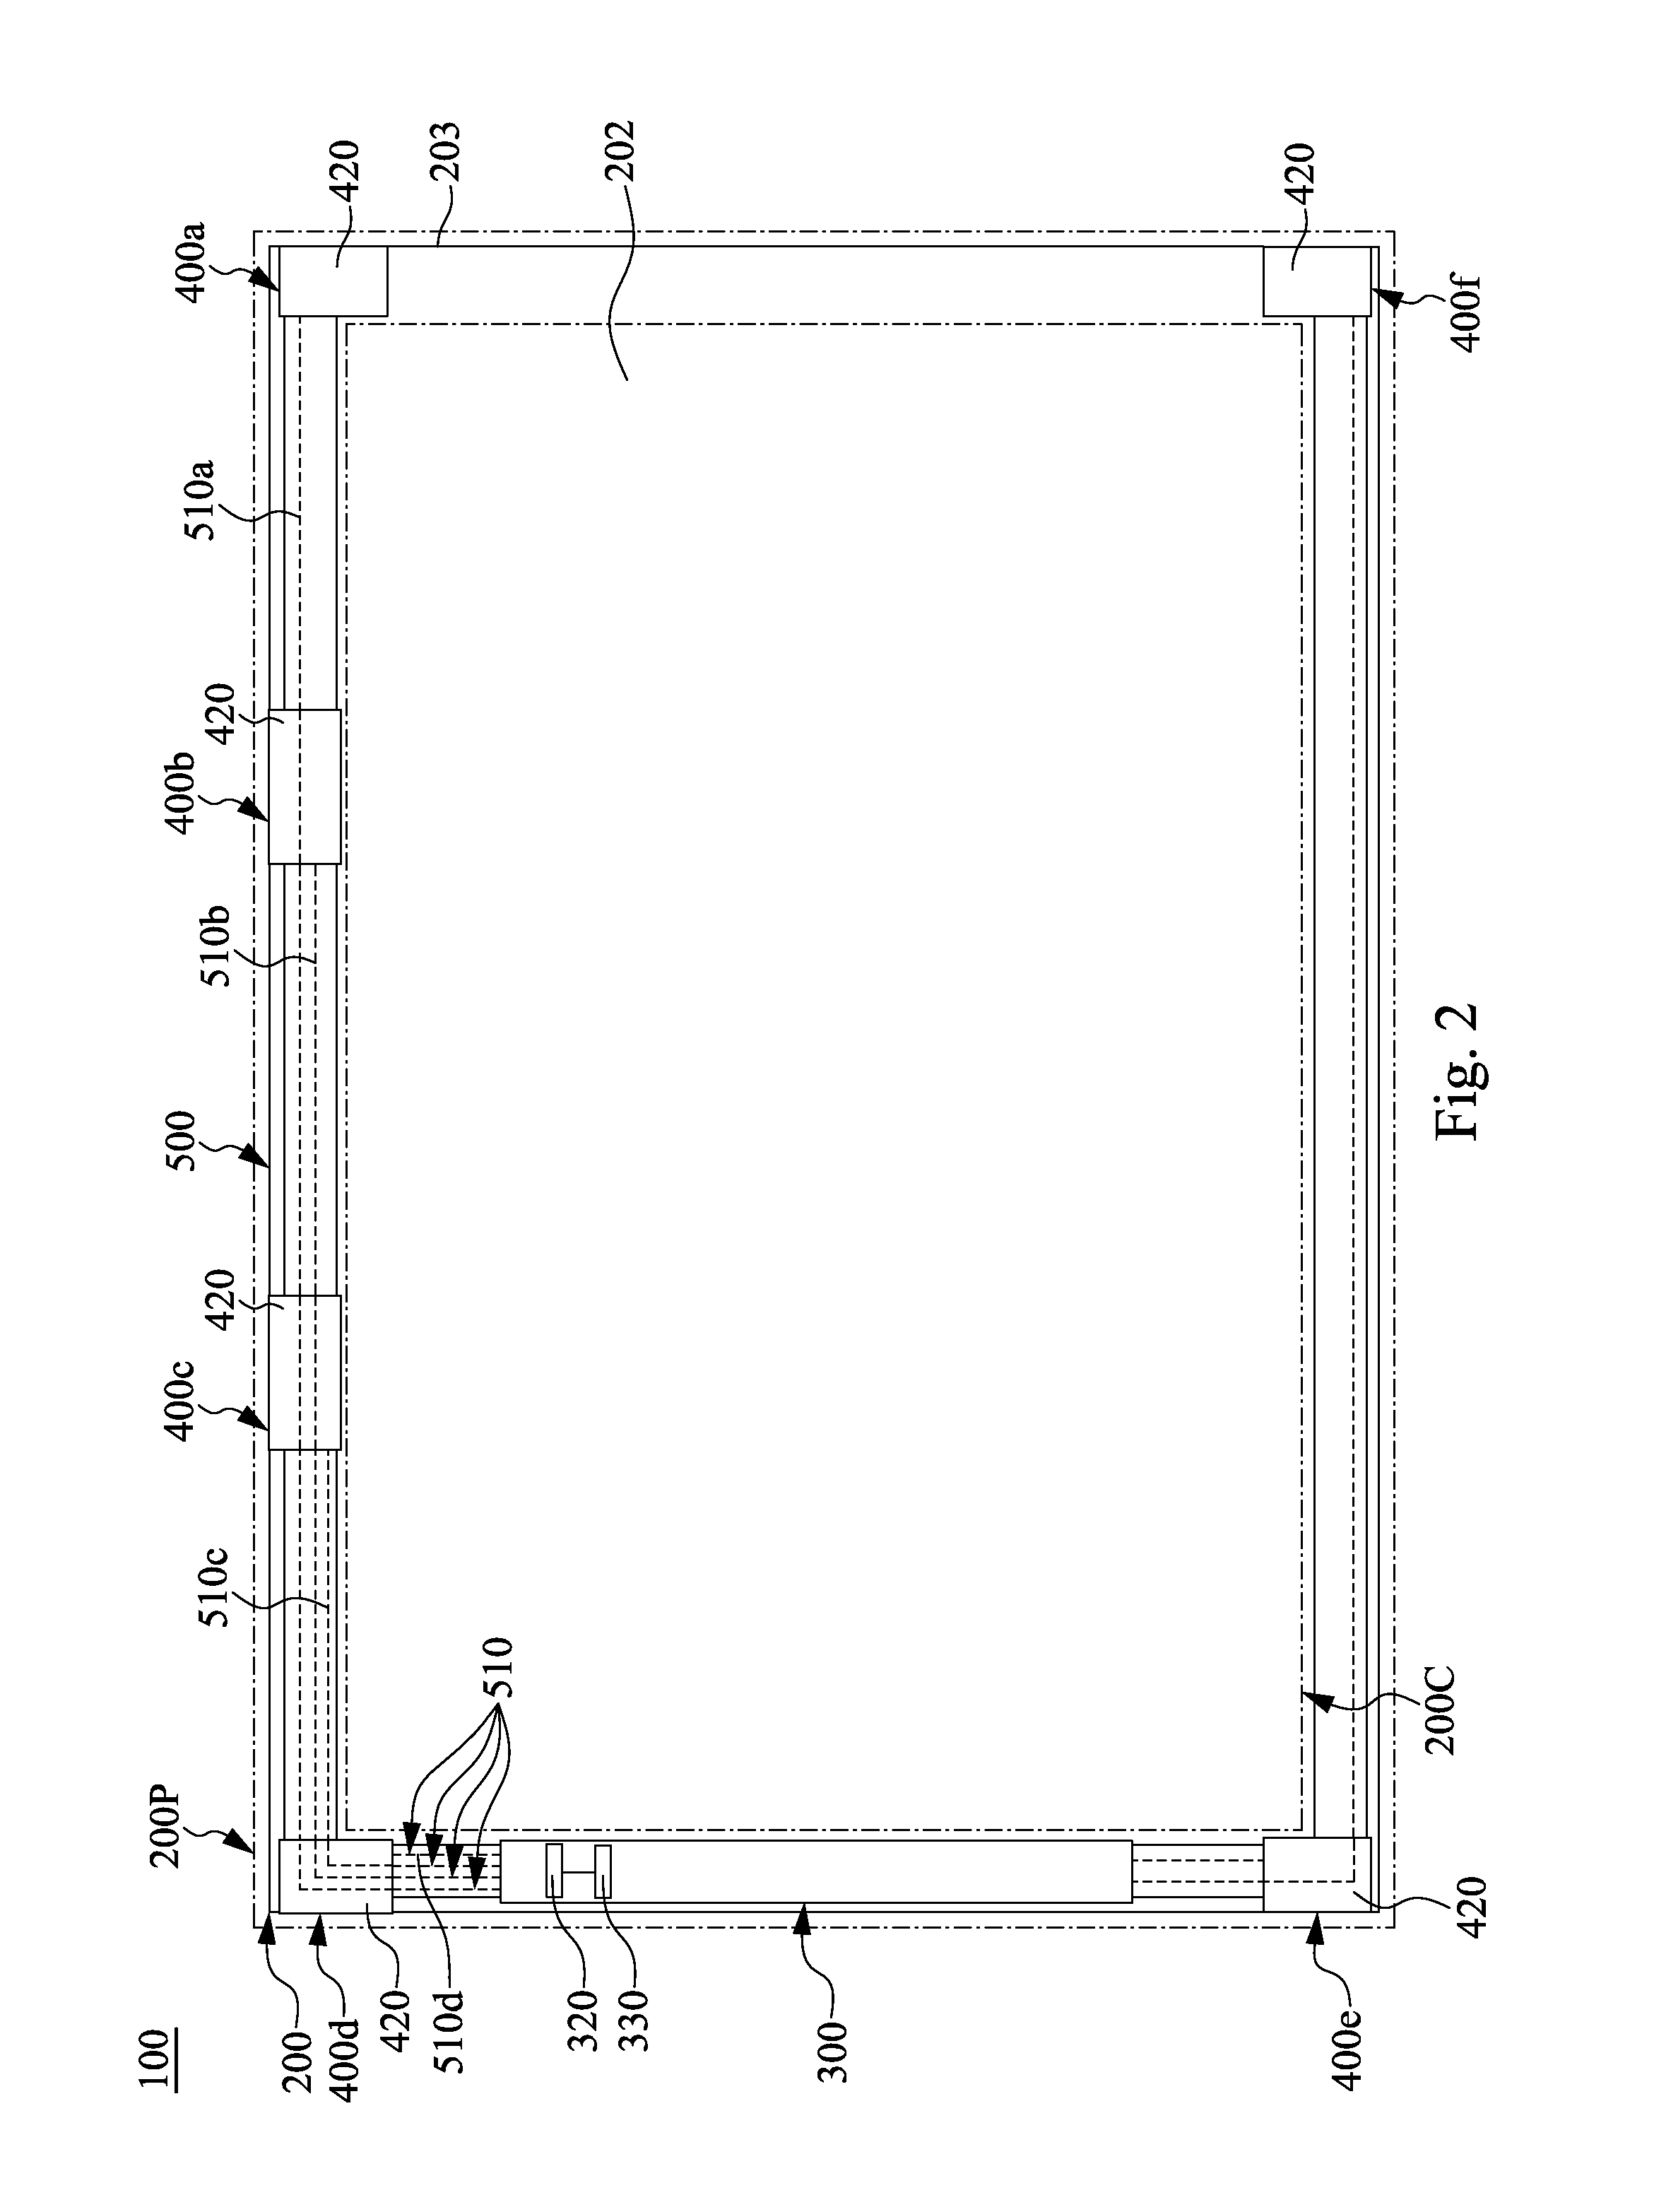 Optical multi-touch device and its optical touch module